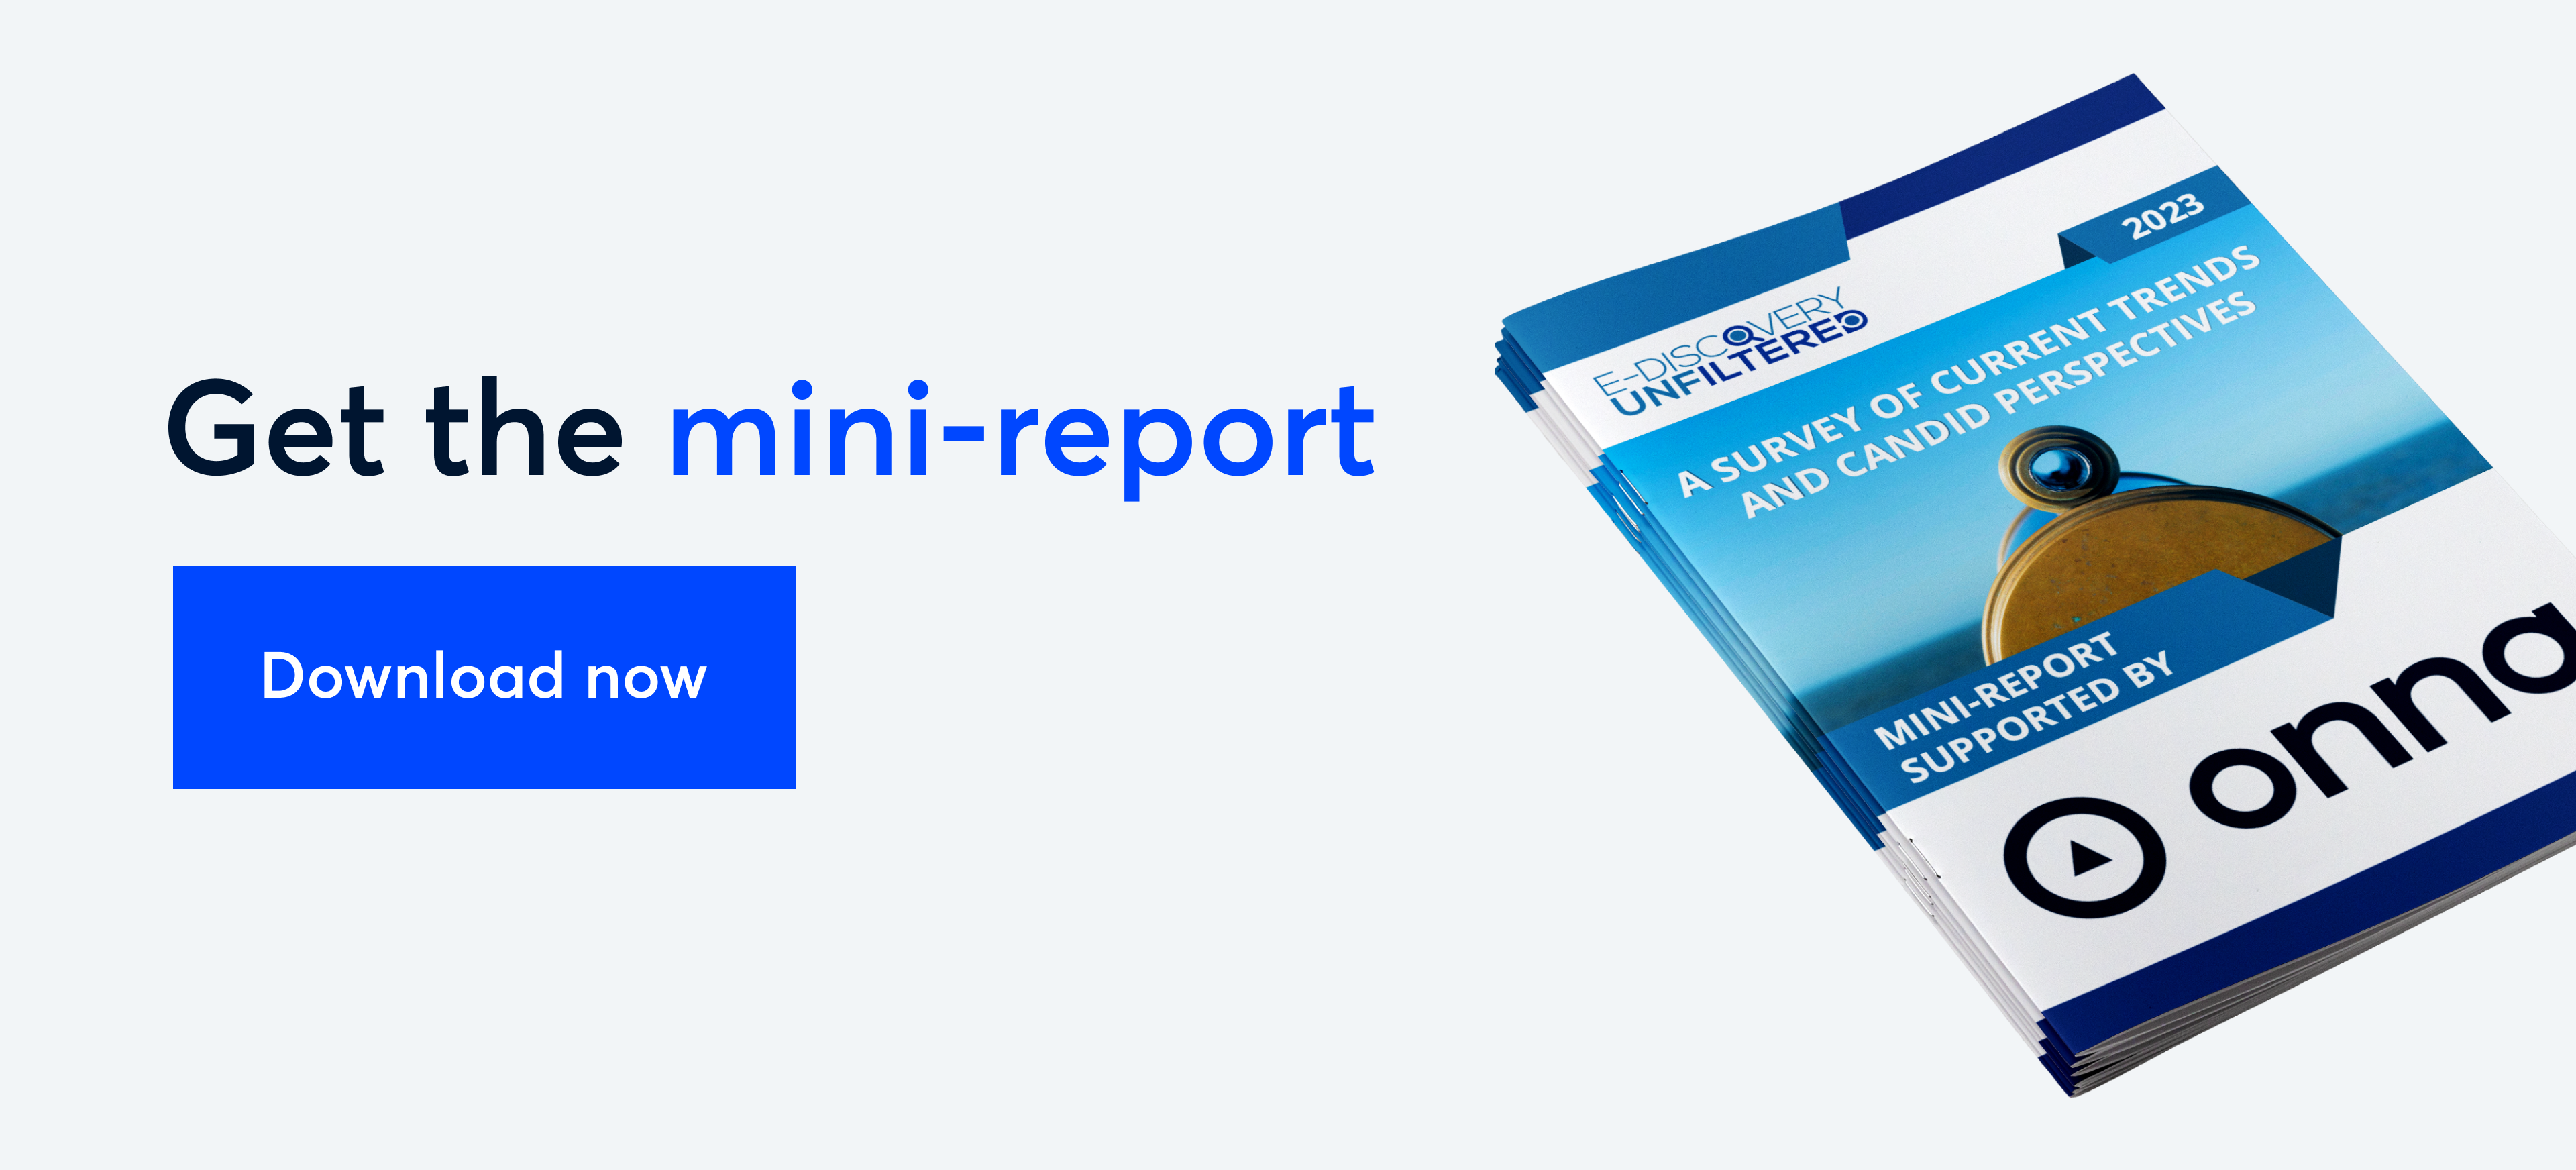 Get the mini-report. Download now.